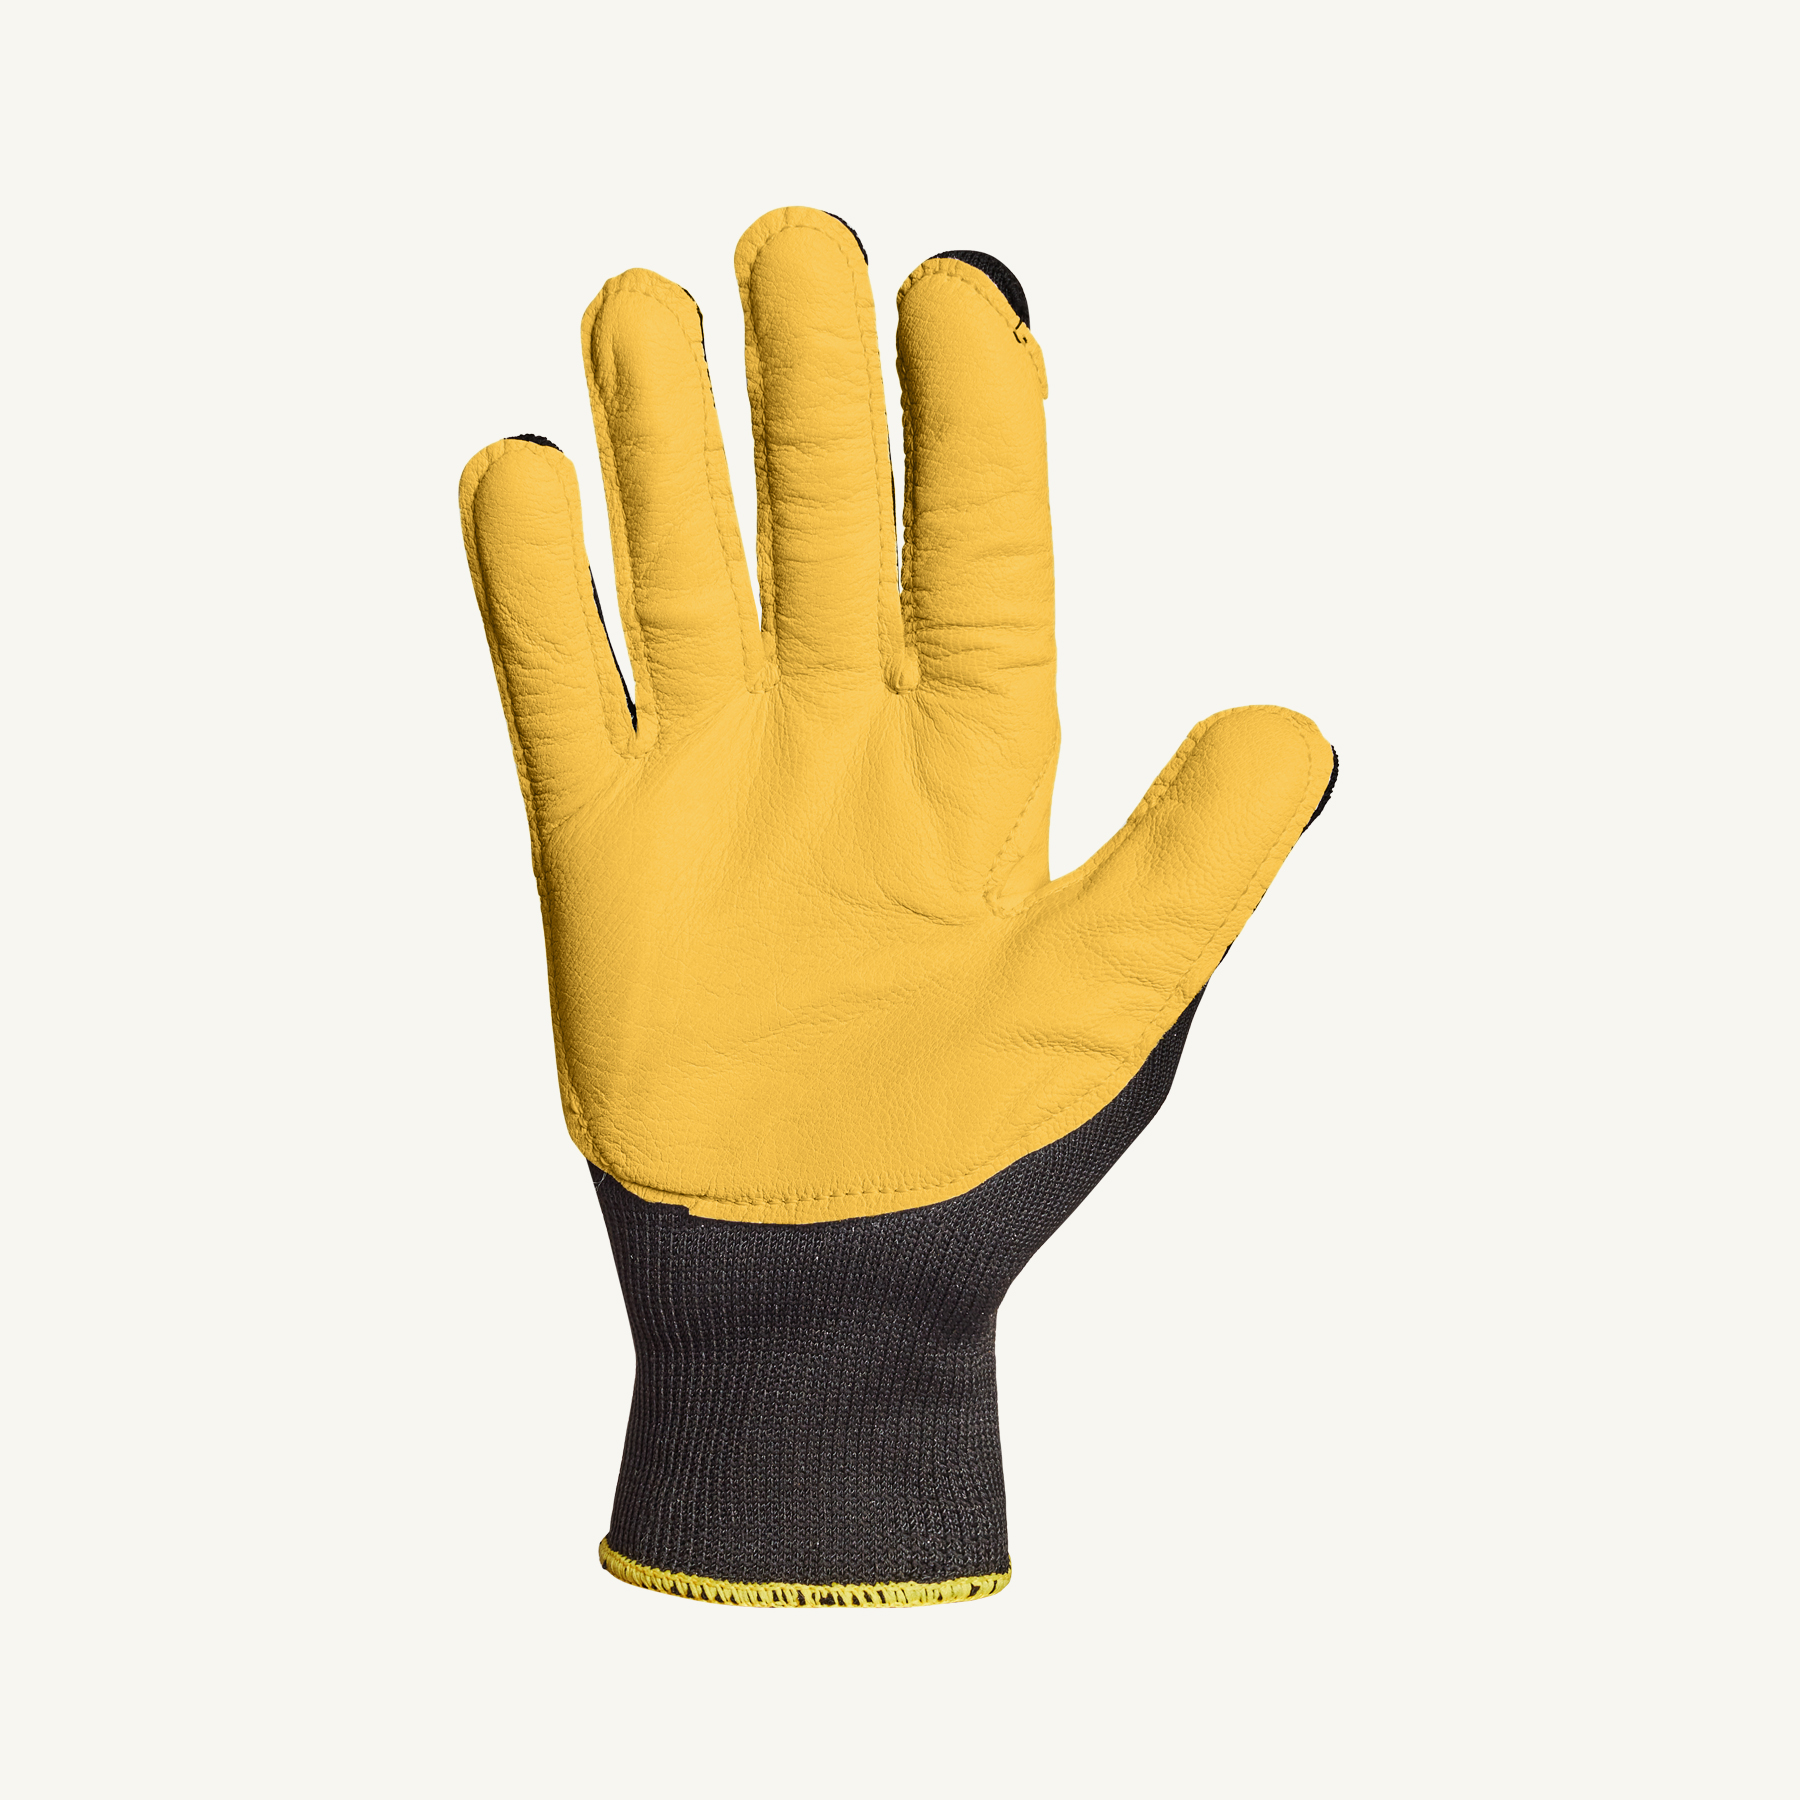 Emerald CX® S13KBGLP Kevlar Leather Palm String Knit Work Gloves, Leather  Palm A5 Cut Safety Knitted Work Gloves